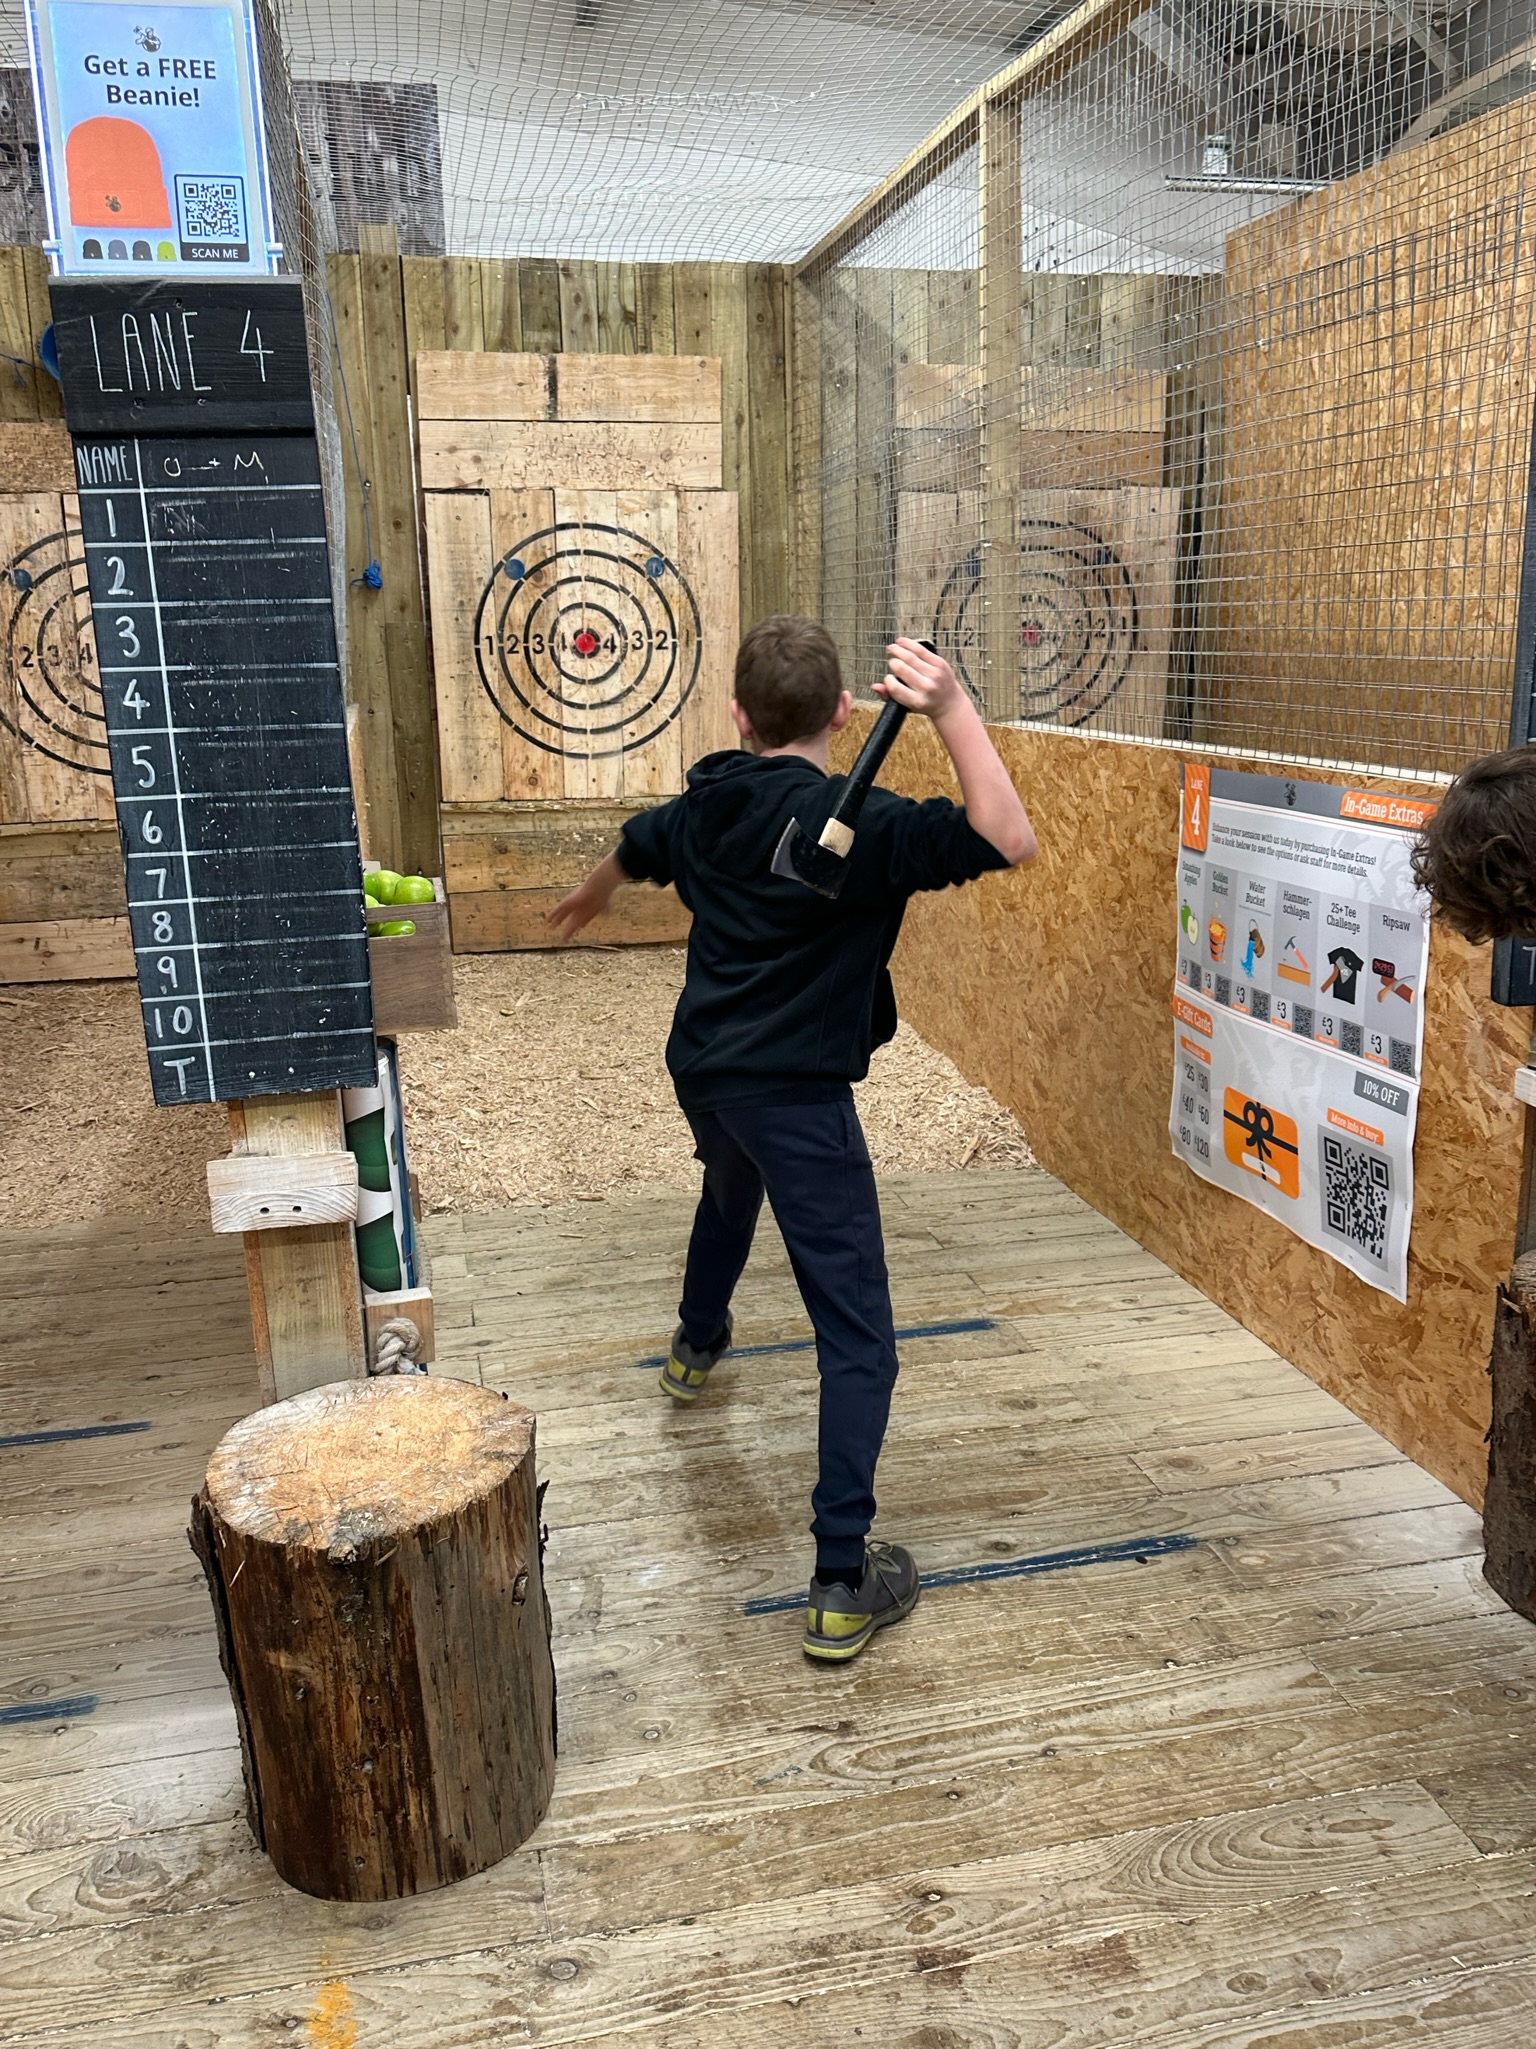 Child axe throwing